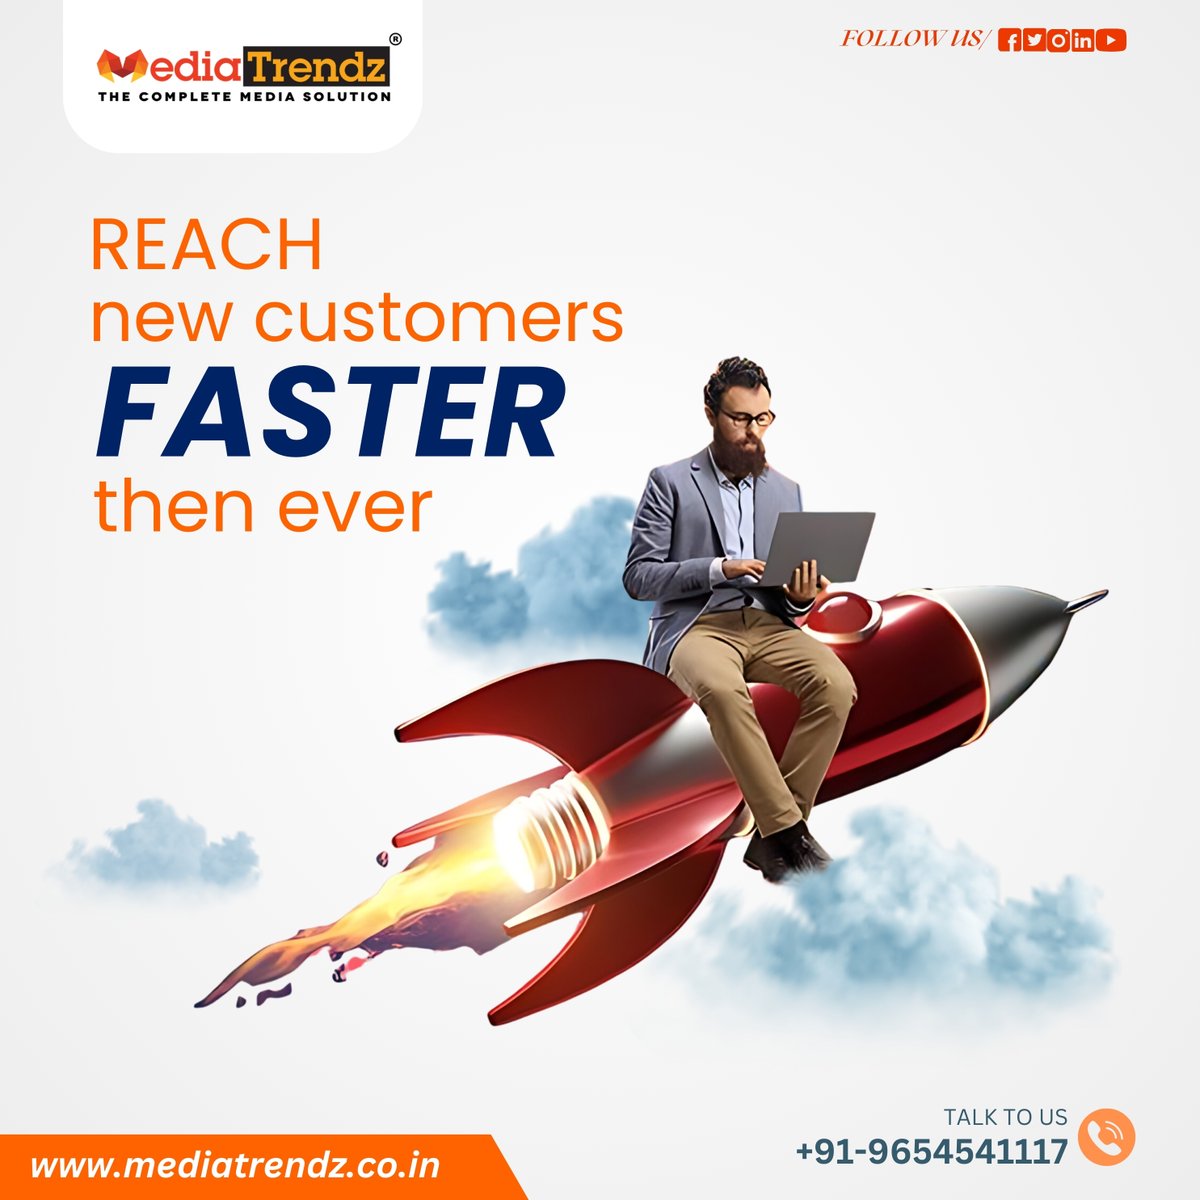 Take off towards prosperity with Media Trendz🚀 With our state-of-the-art digital marketing solutions, you may reach new clients more quickly than ever
.
#MediaTrendz #DigitalMarketing #OnlinePresence #MarketingStrategy #BrandBuilding #SocialMediaMarketing #SEO #PPC #ContentHub